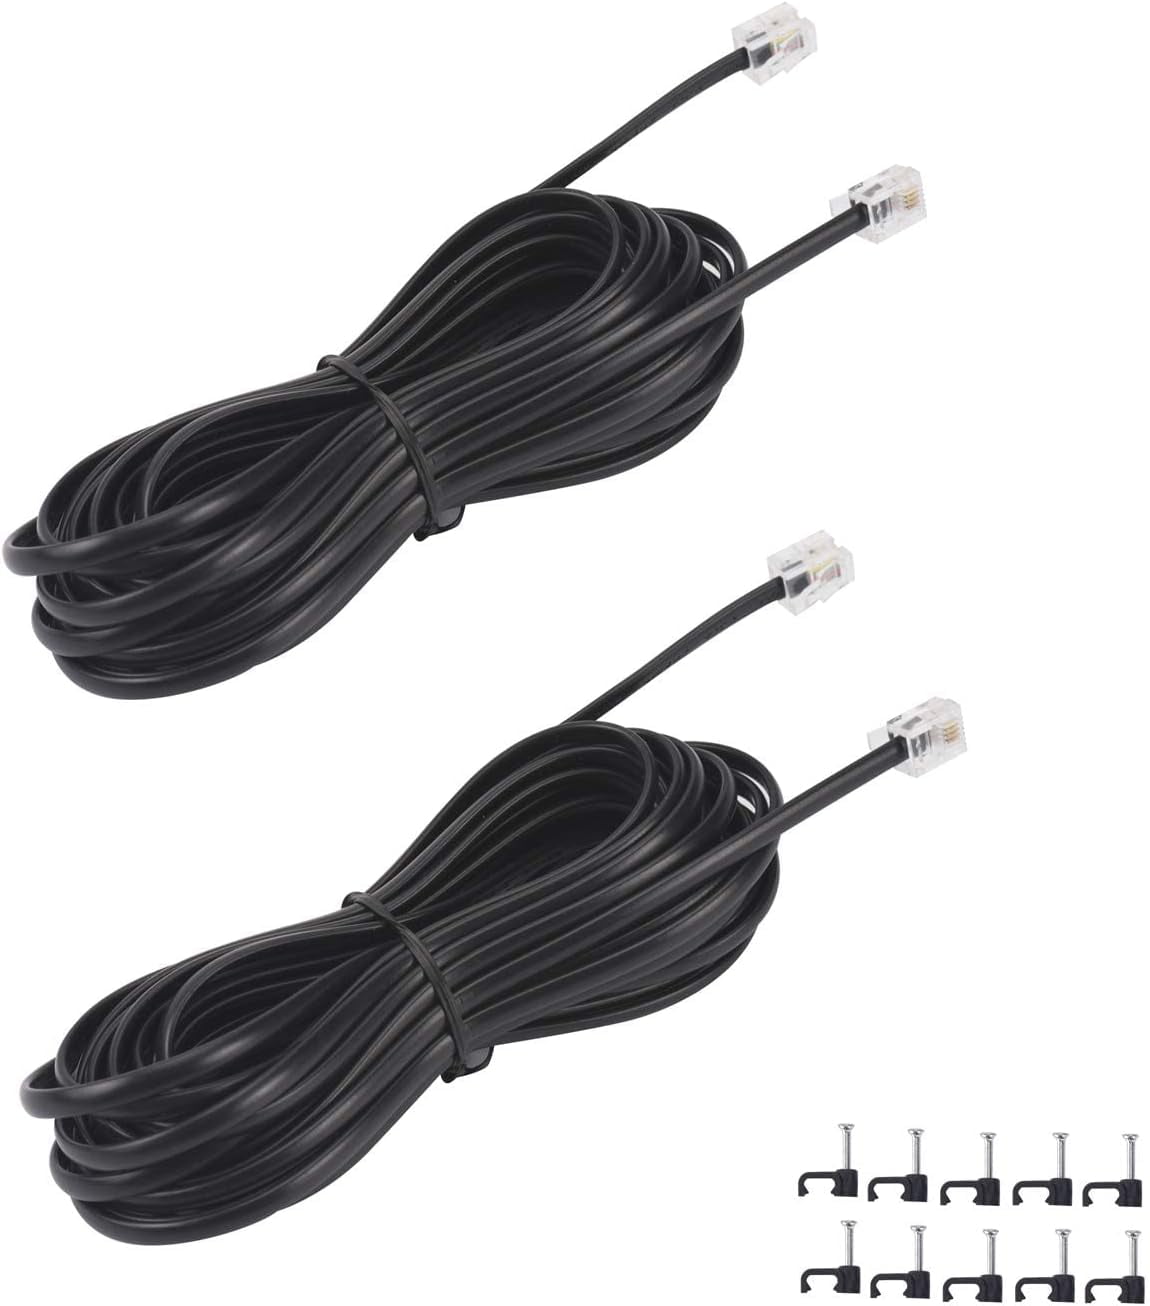 High Speed 3FT 1M RJ11 Telephone Phone ADSL Modem Line Cord Cable